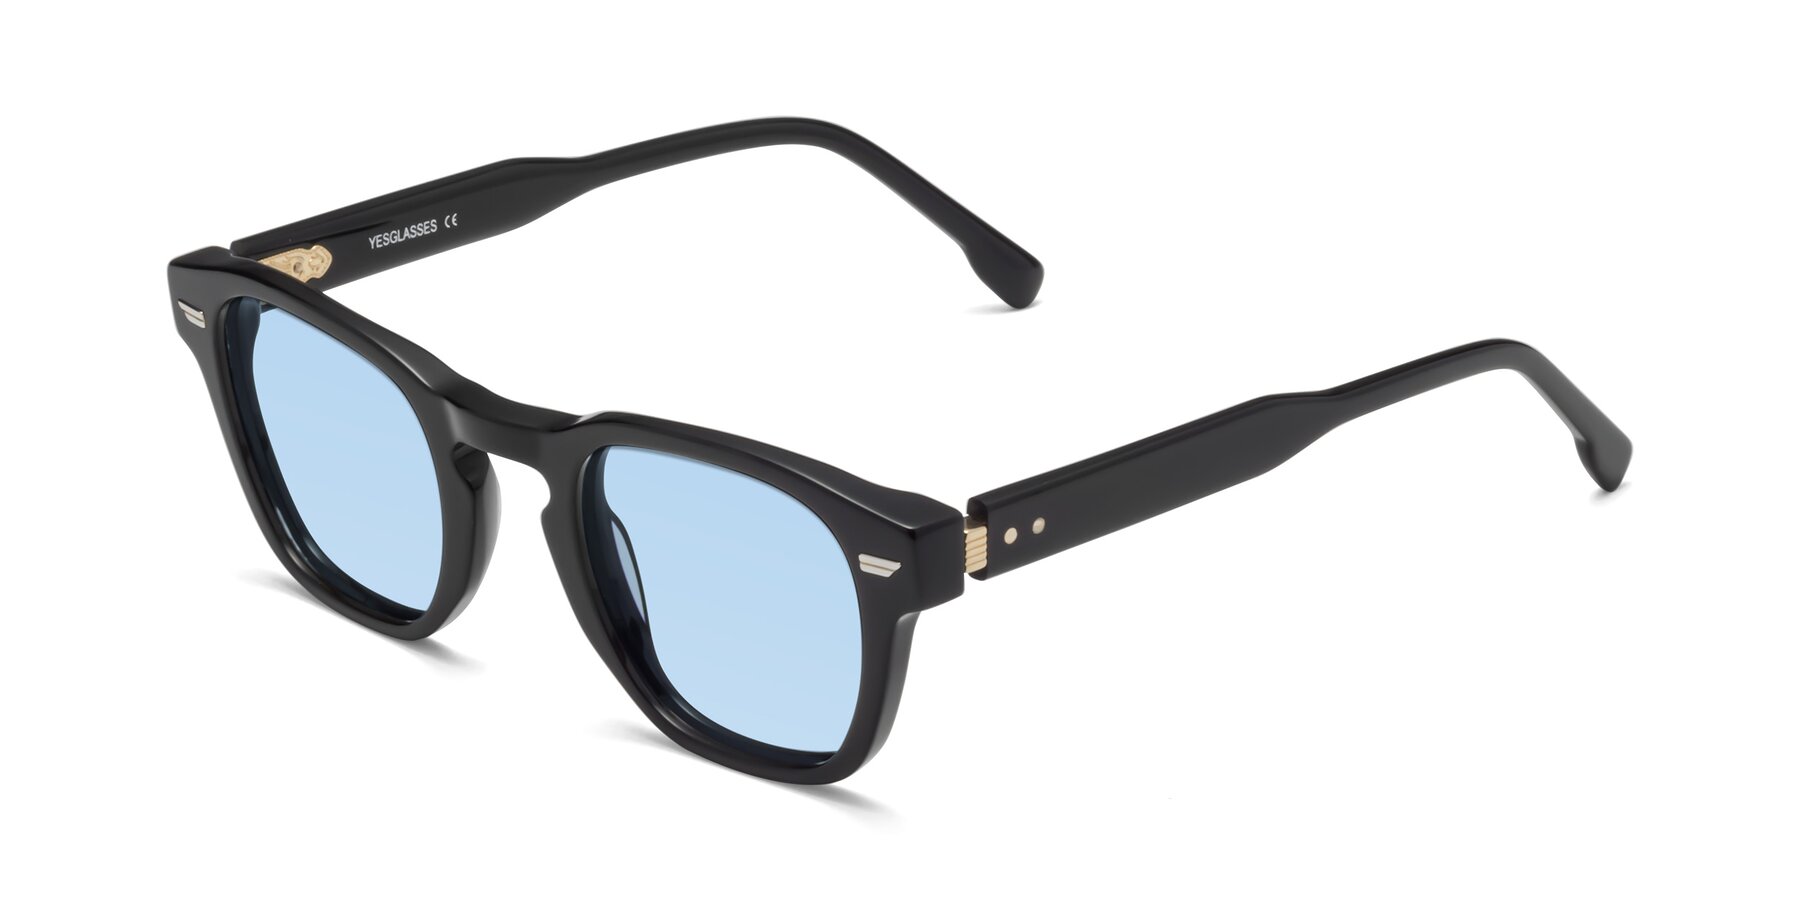 Angle of 1421 in Black with Light Blue Tinted Lenses